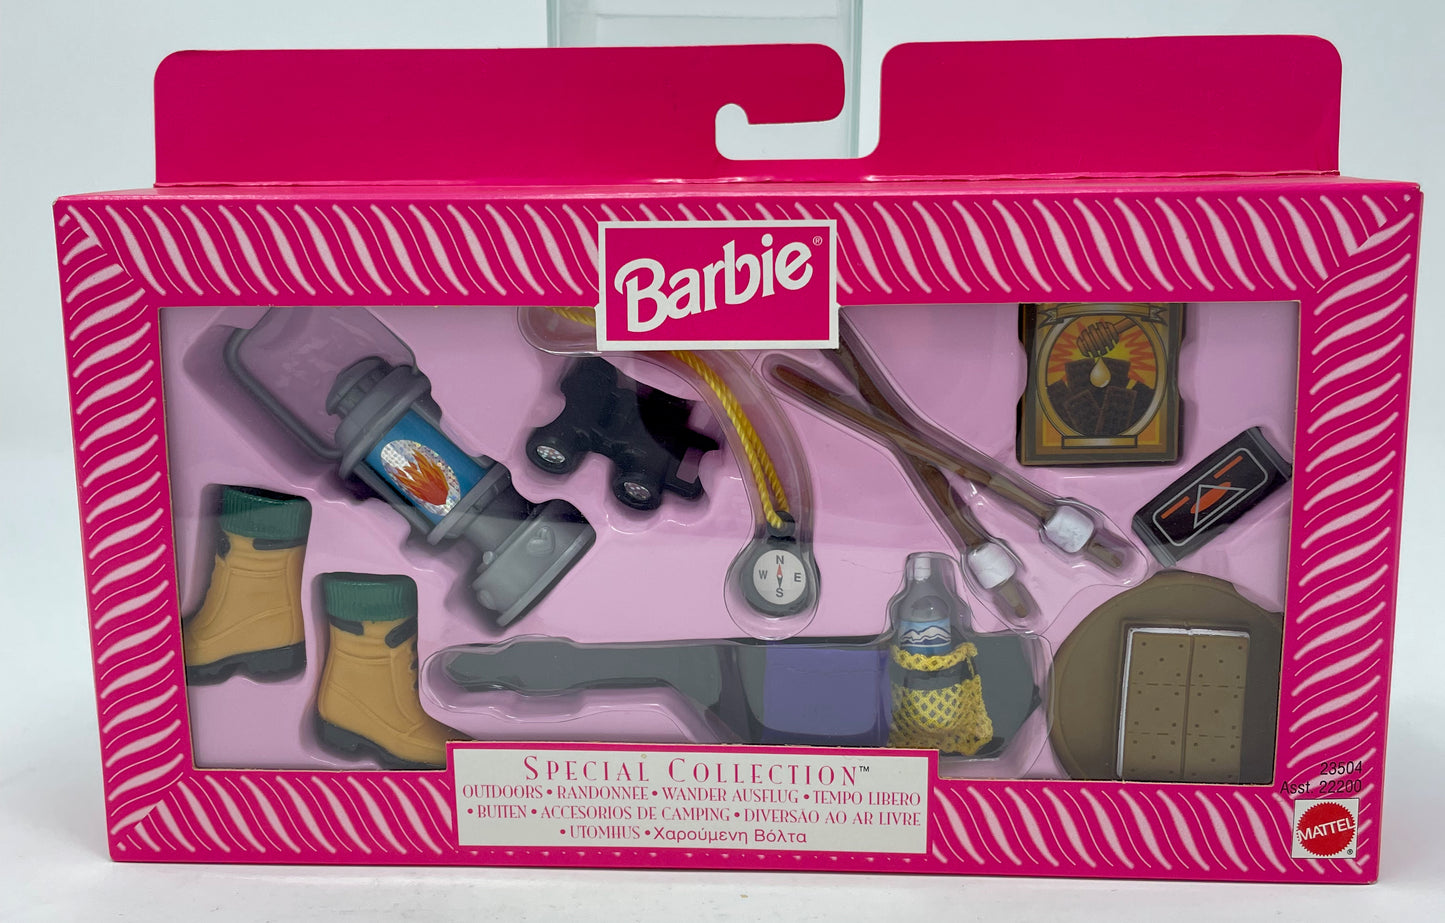 BARBIE SPECIAL COLLECTION OUTDOORS - CAMPING ACCESSORIES - MATTEL 1999